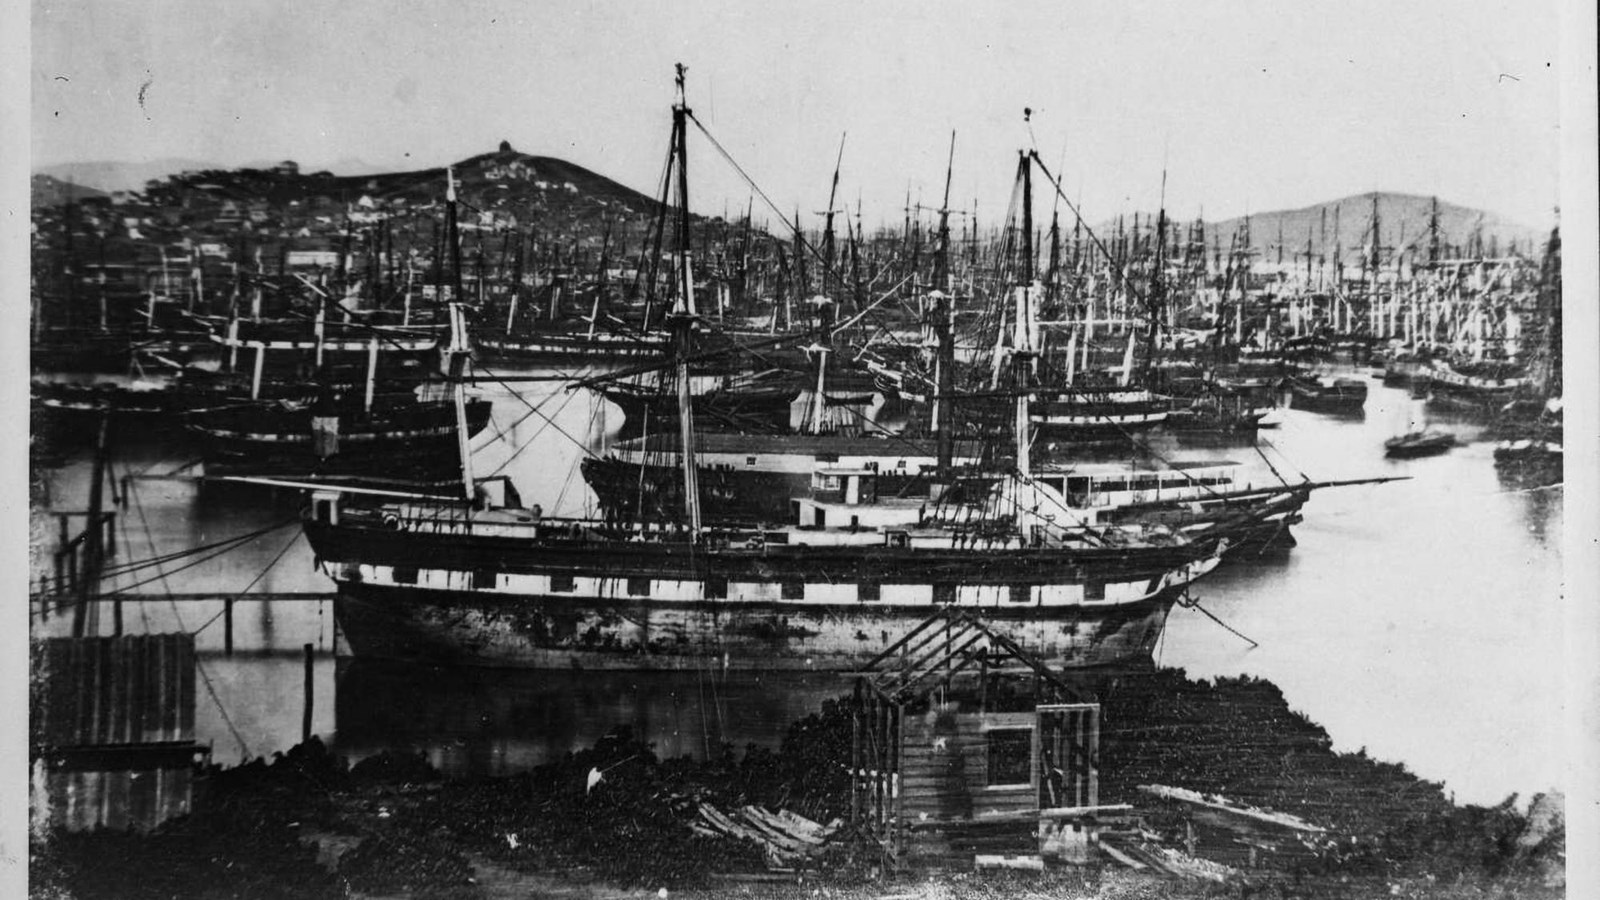 Black and white image of boats in the marina.